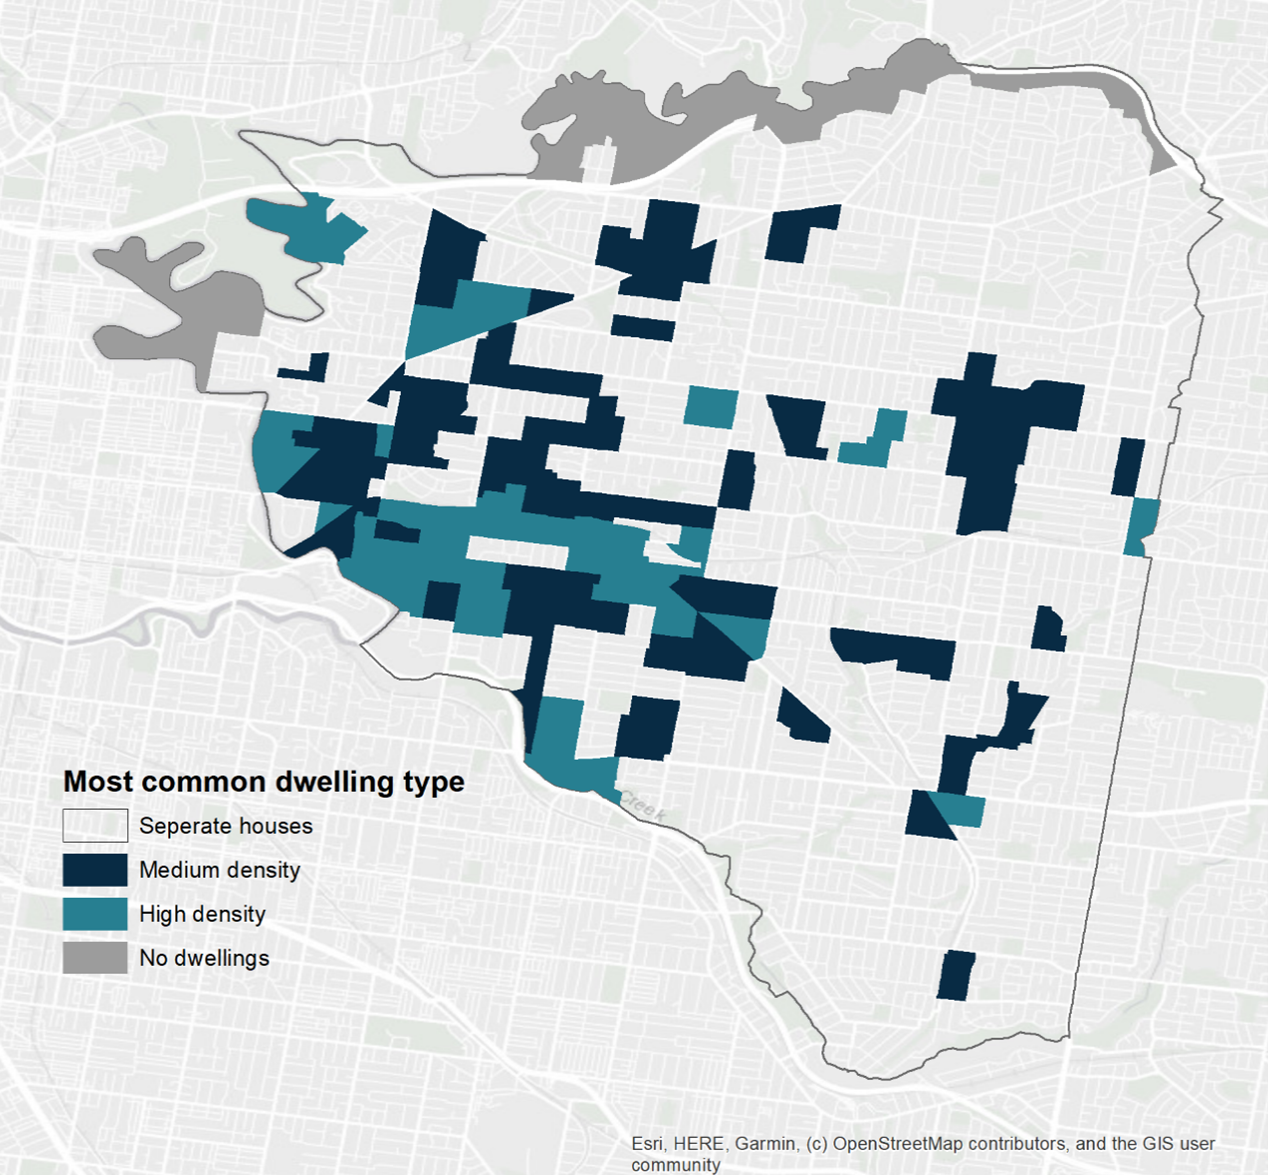 Map of Boroondara showing high density dwellings as the dominant dwelling type and medium density dwellings also appearing predominantly. Both of these types appear mostly in the western part of the map.